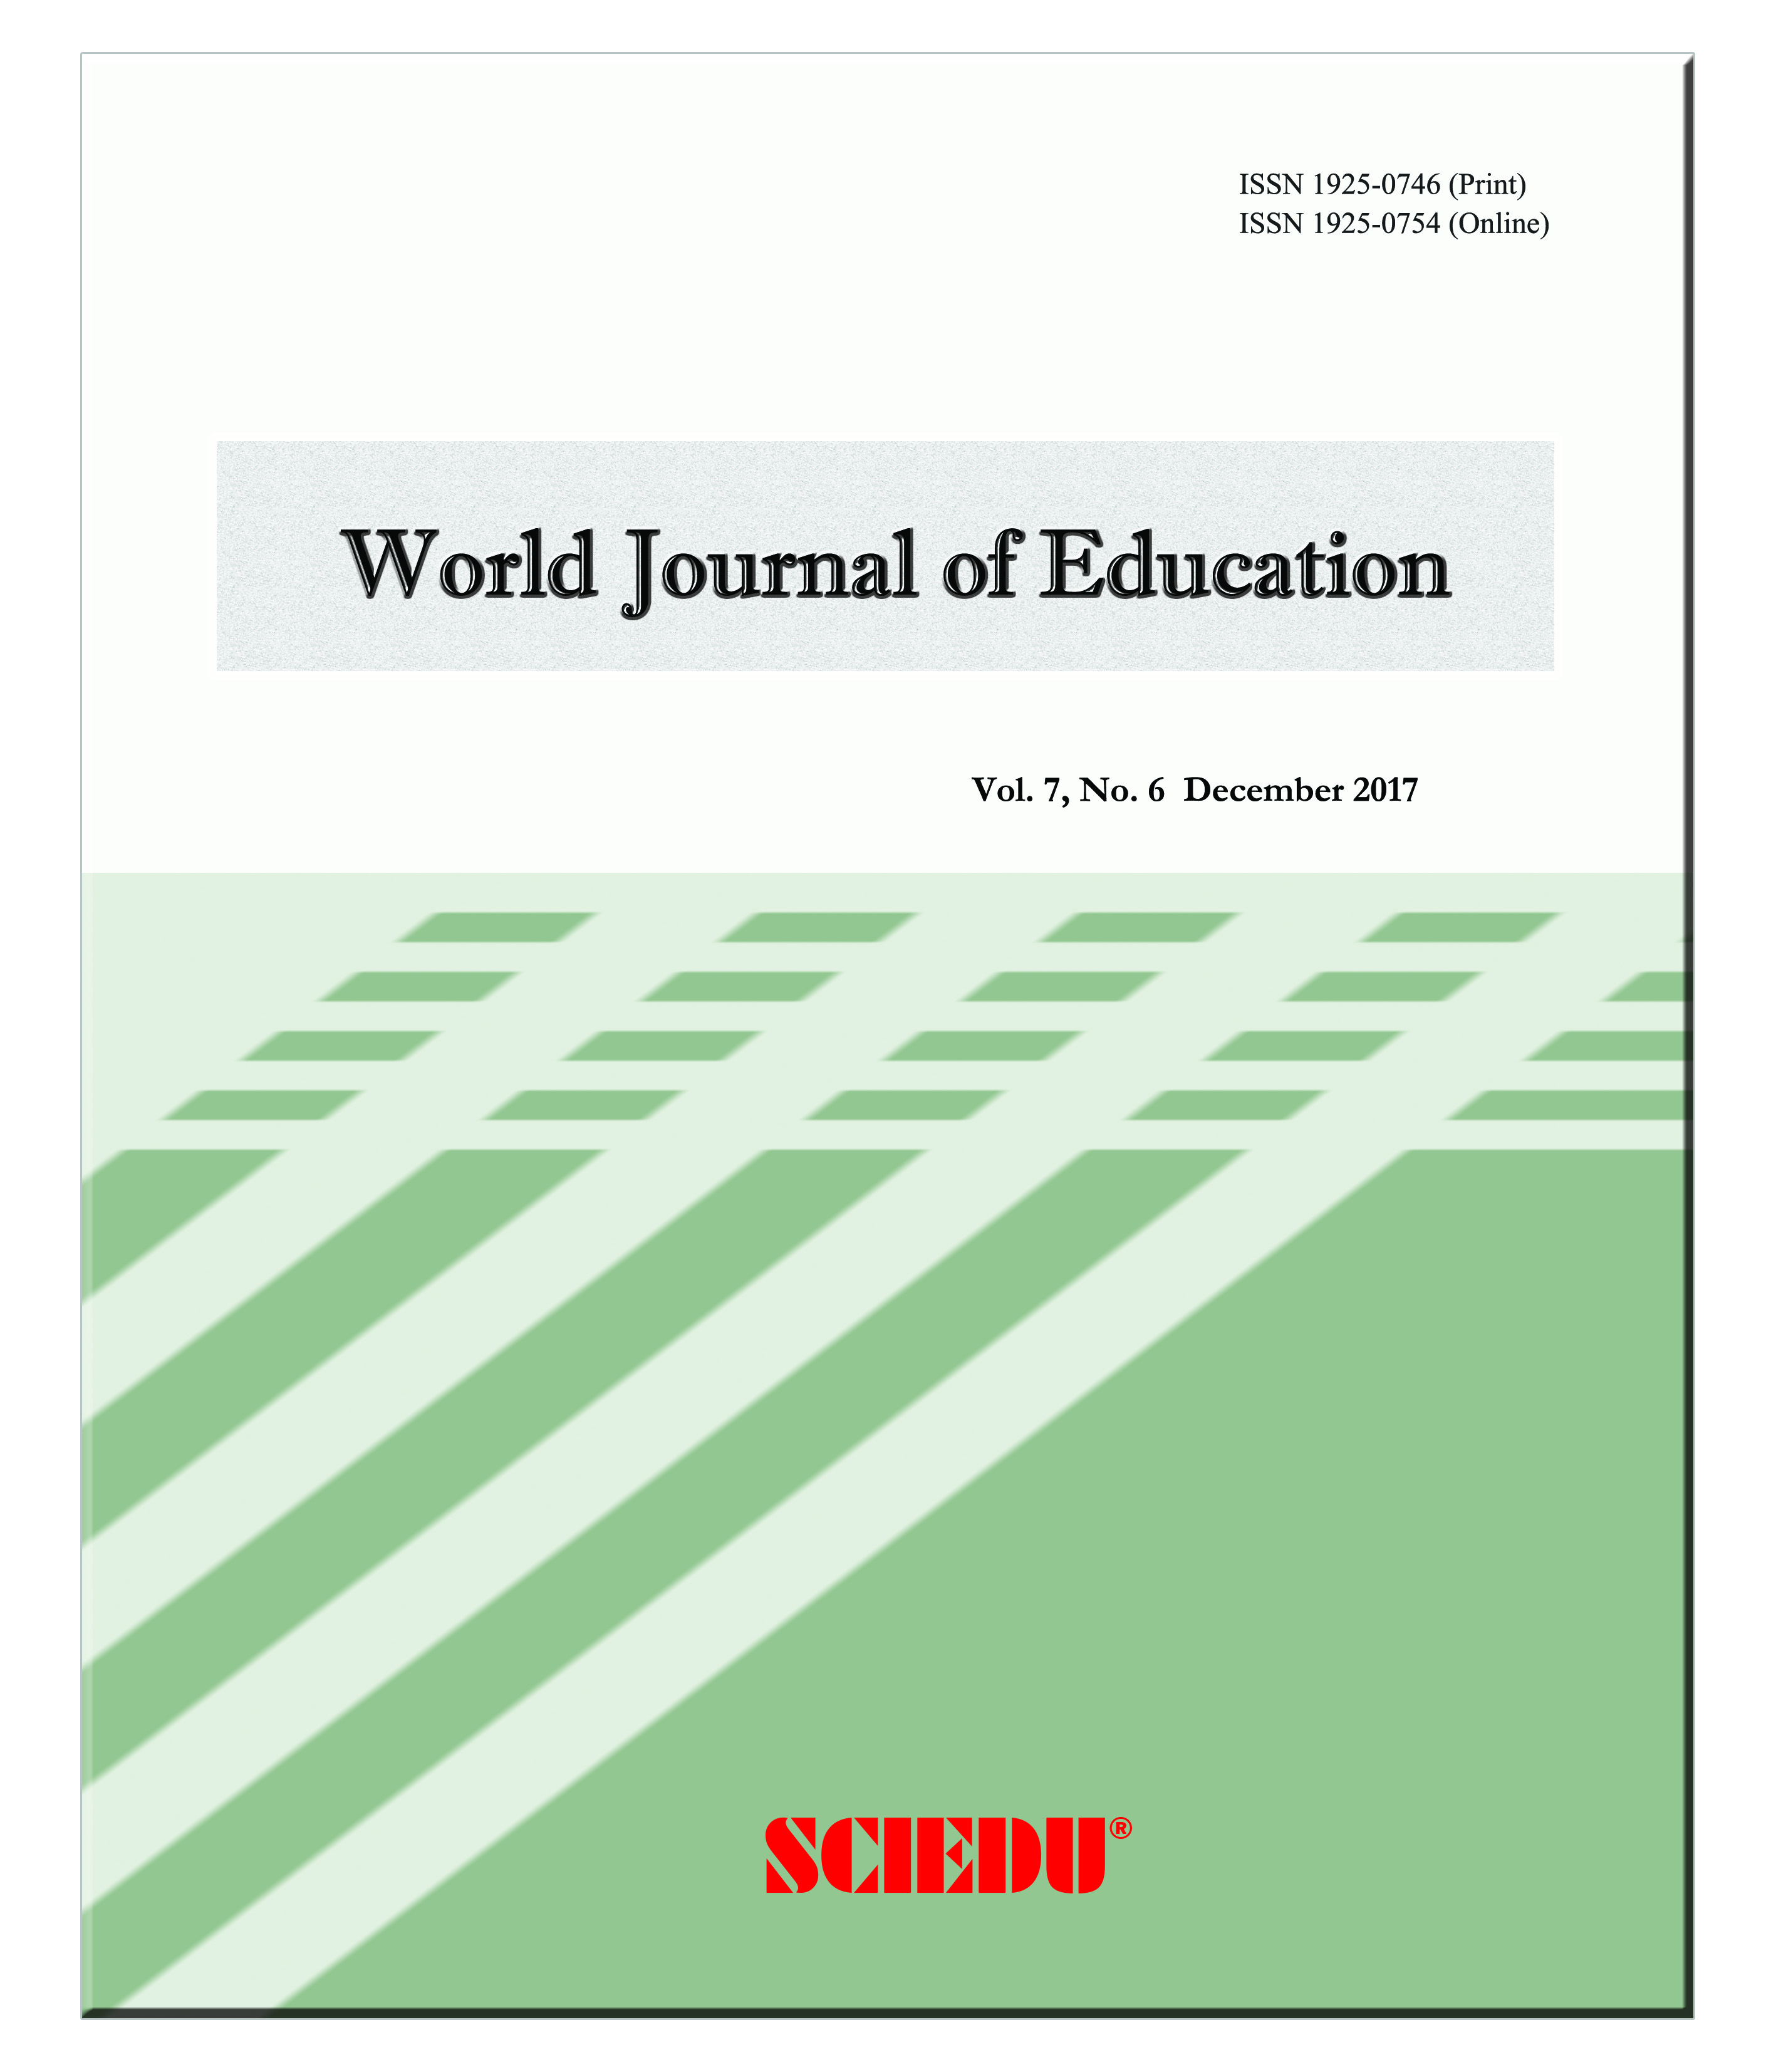 journal articles about education system